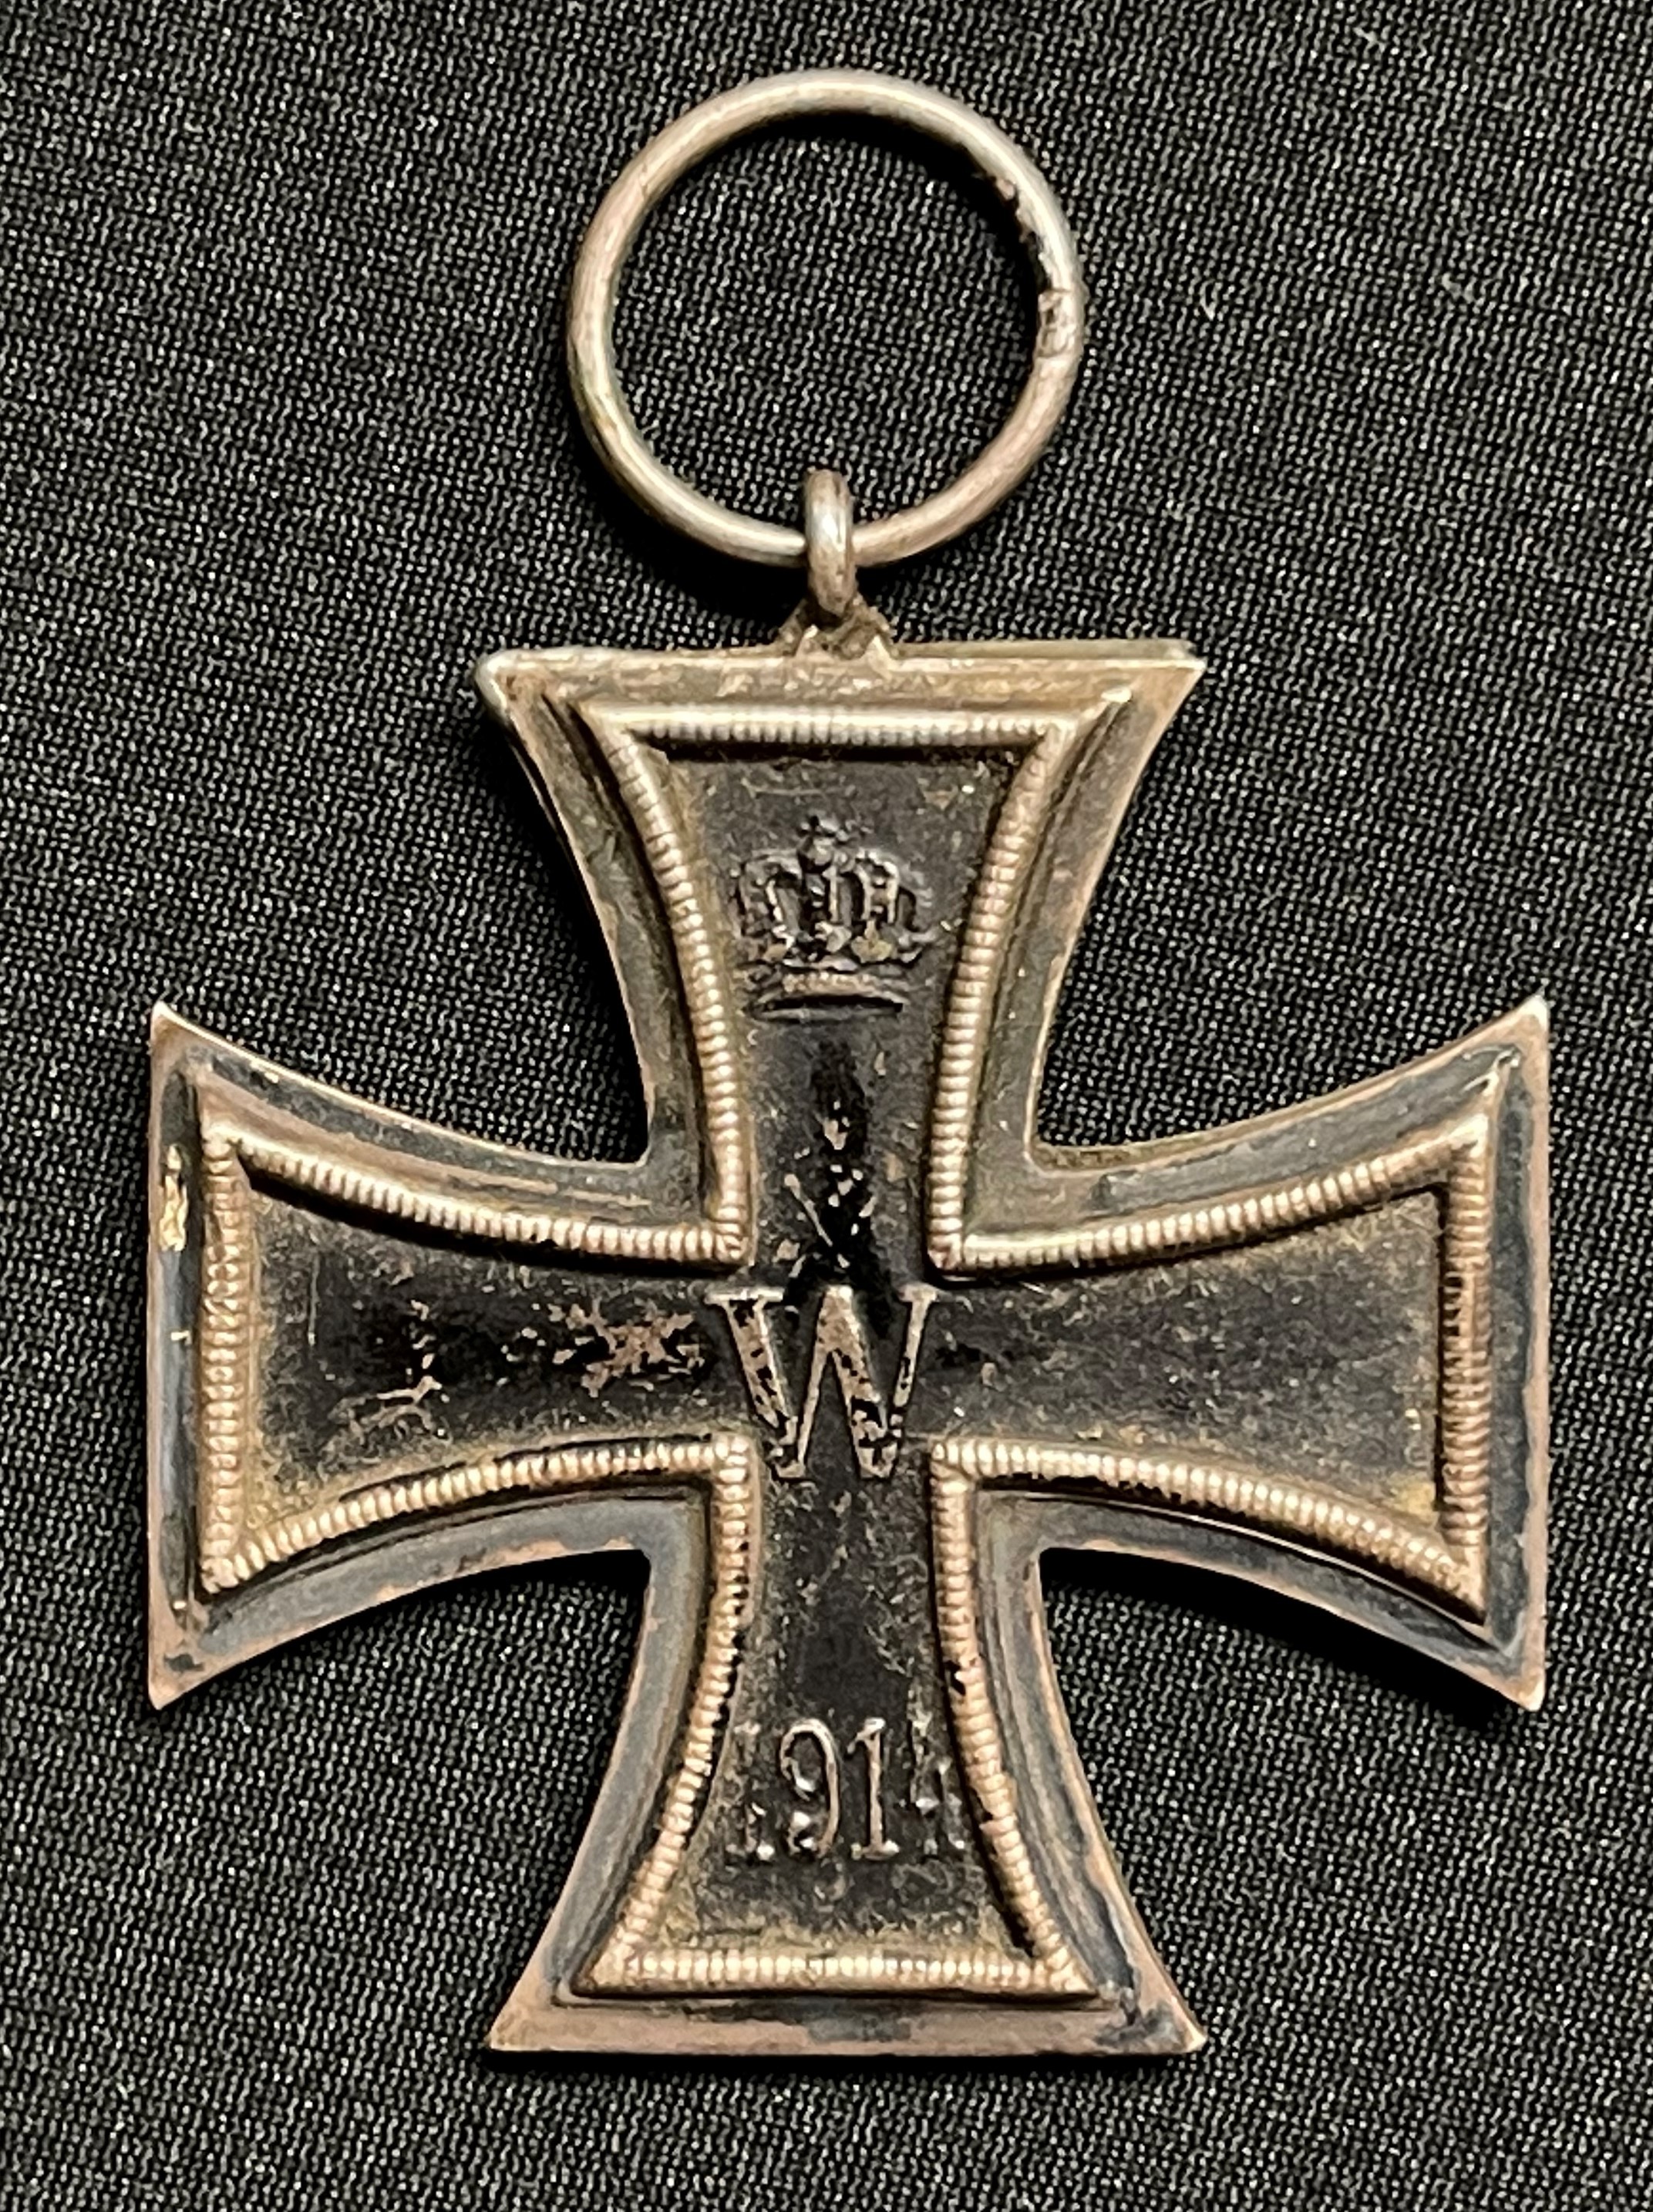 WW1 Imperial German Iron Cross 2nd class 1914. Maker marked to ring "KO". No ribbon.